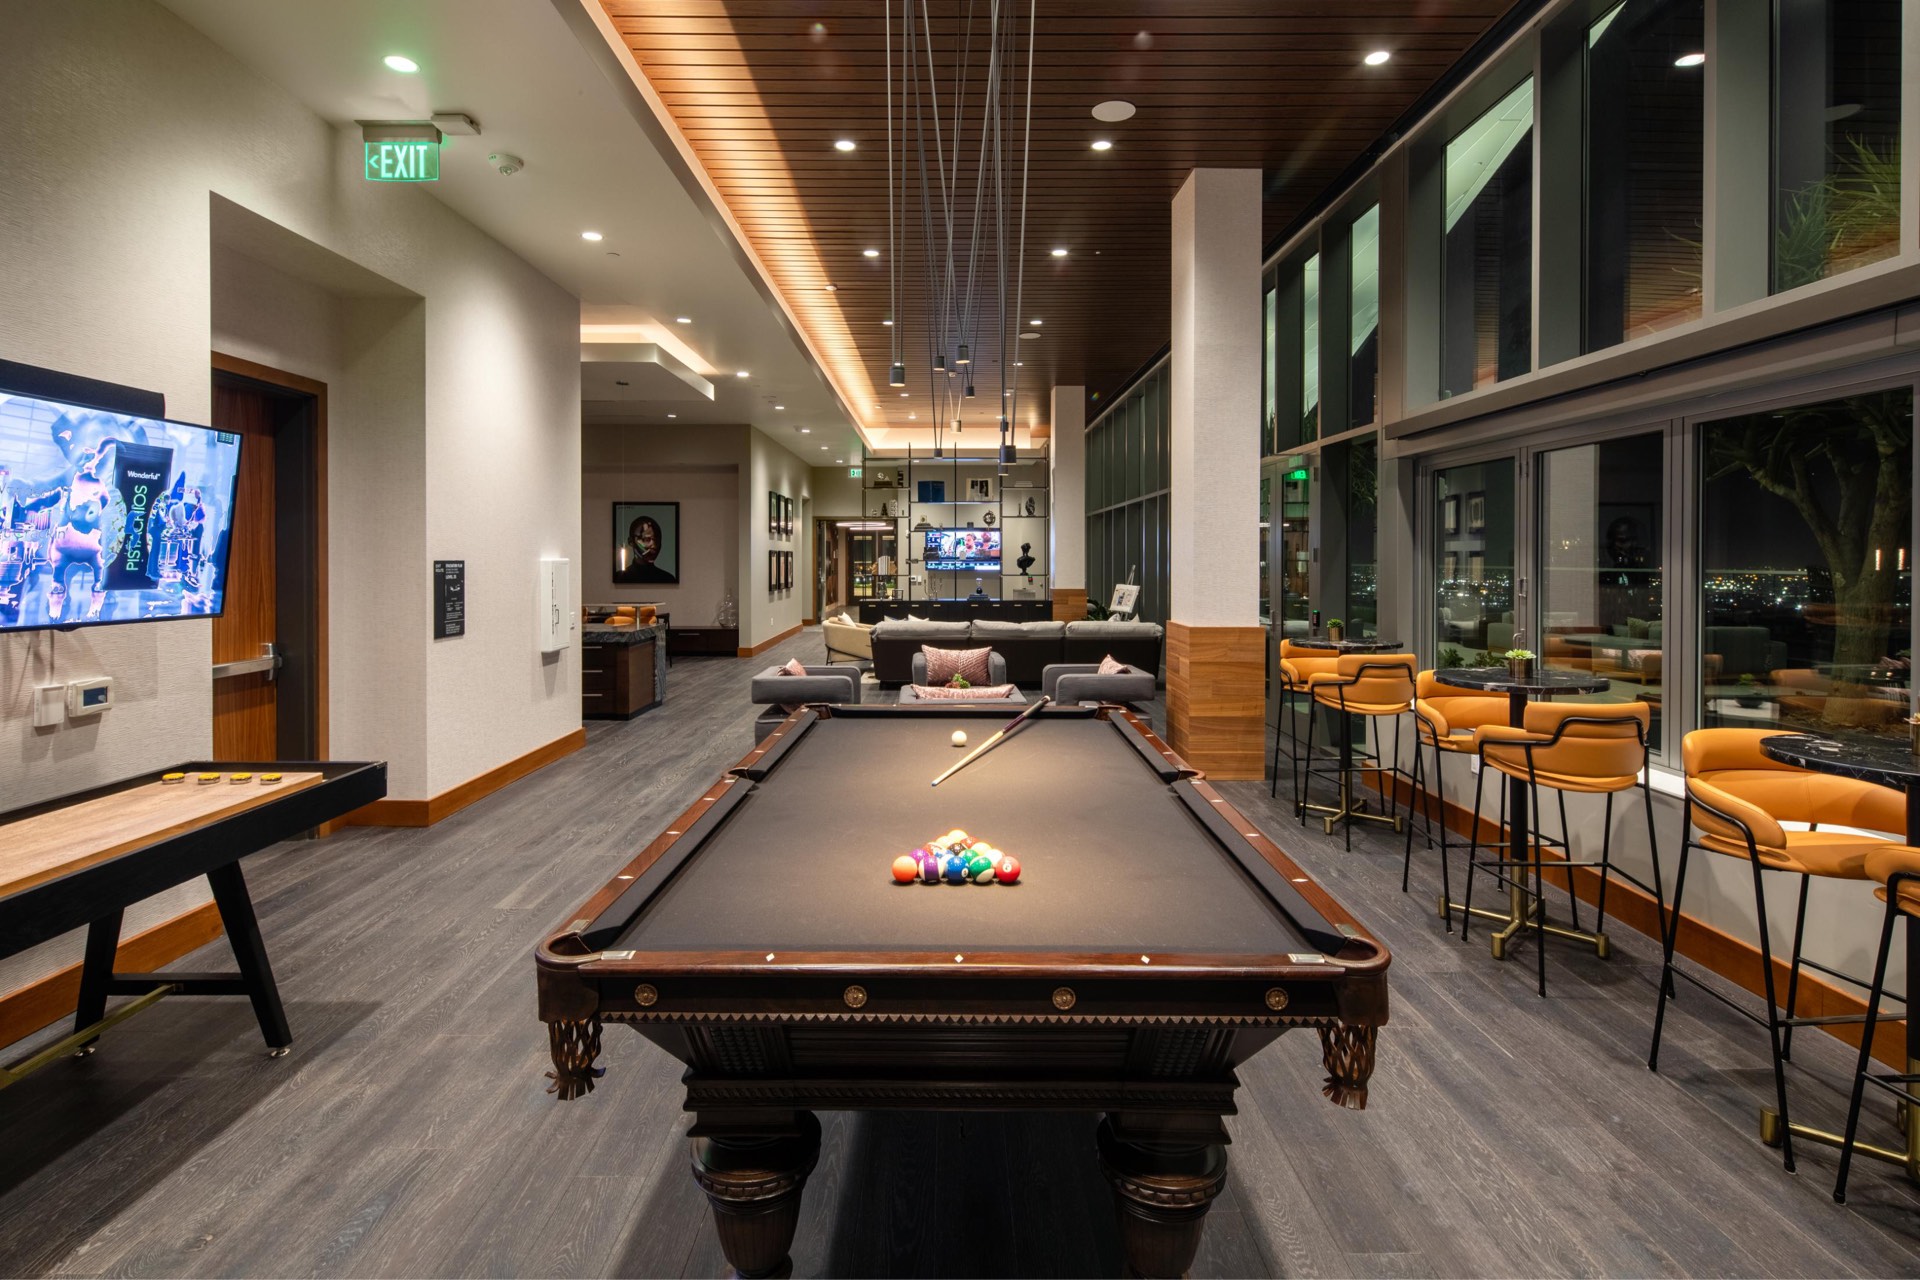 Clubhouse with pool table and other games to entertain